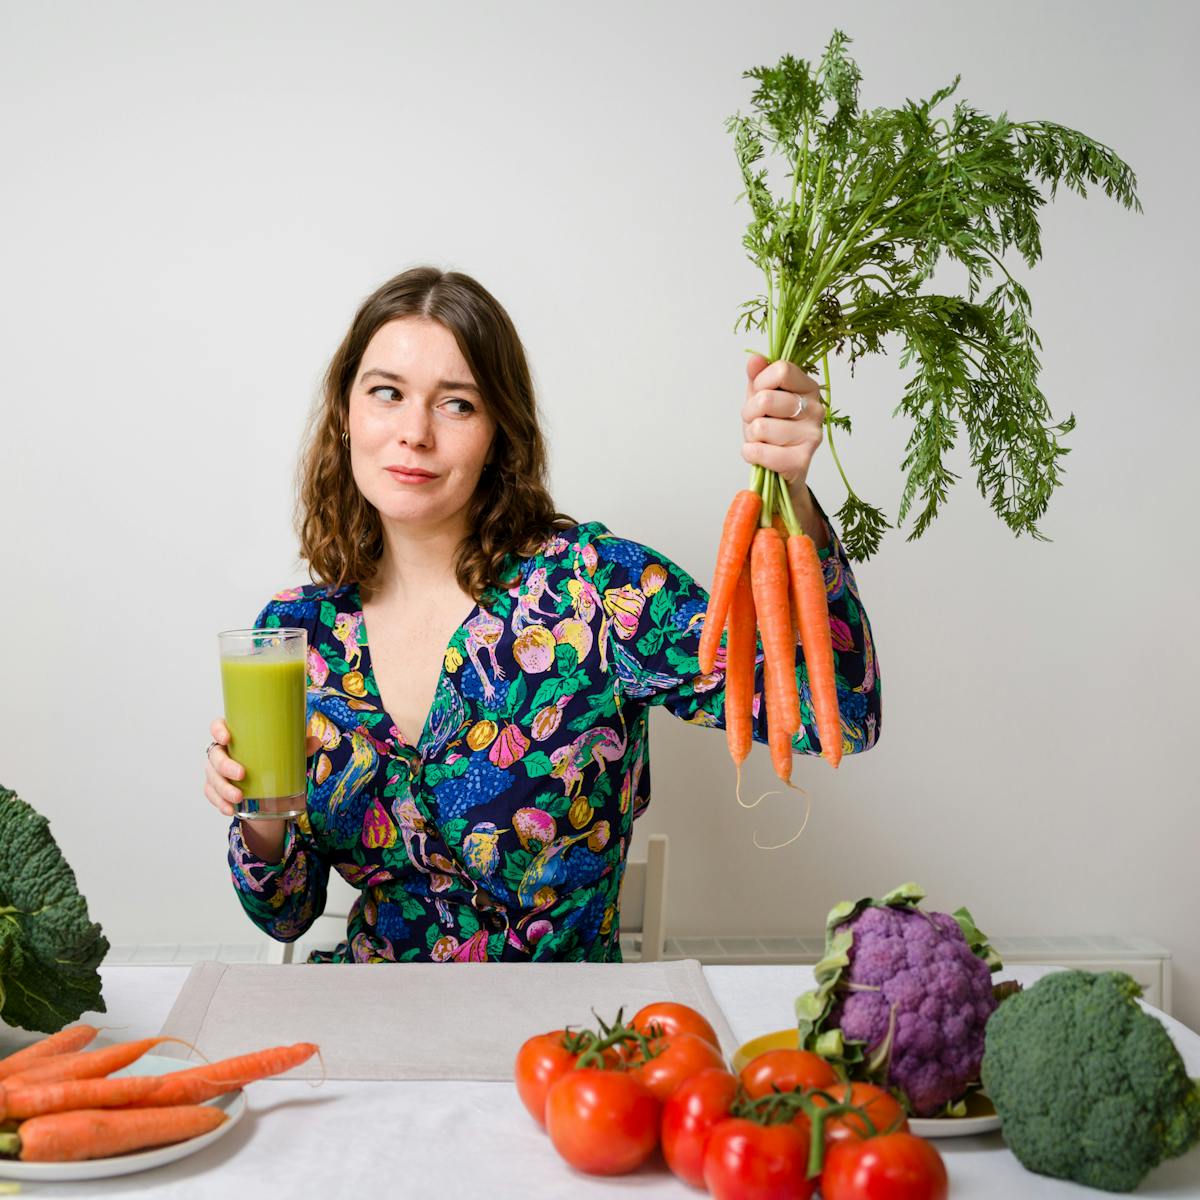 Photograph of writer Gwen Smith sat behind a table which is covered in vegetables, holding carrots in one hand and a green health drink in the other. She is looking sceptically at the vegetables.